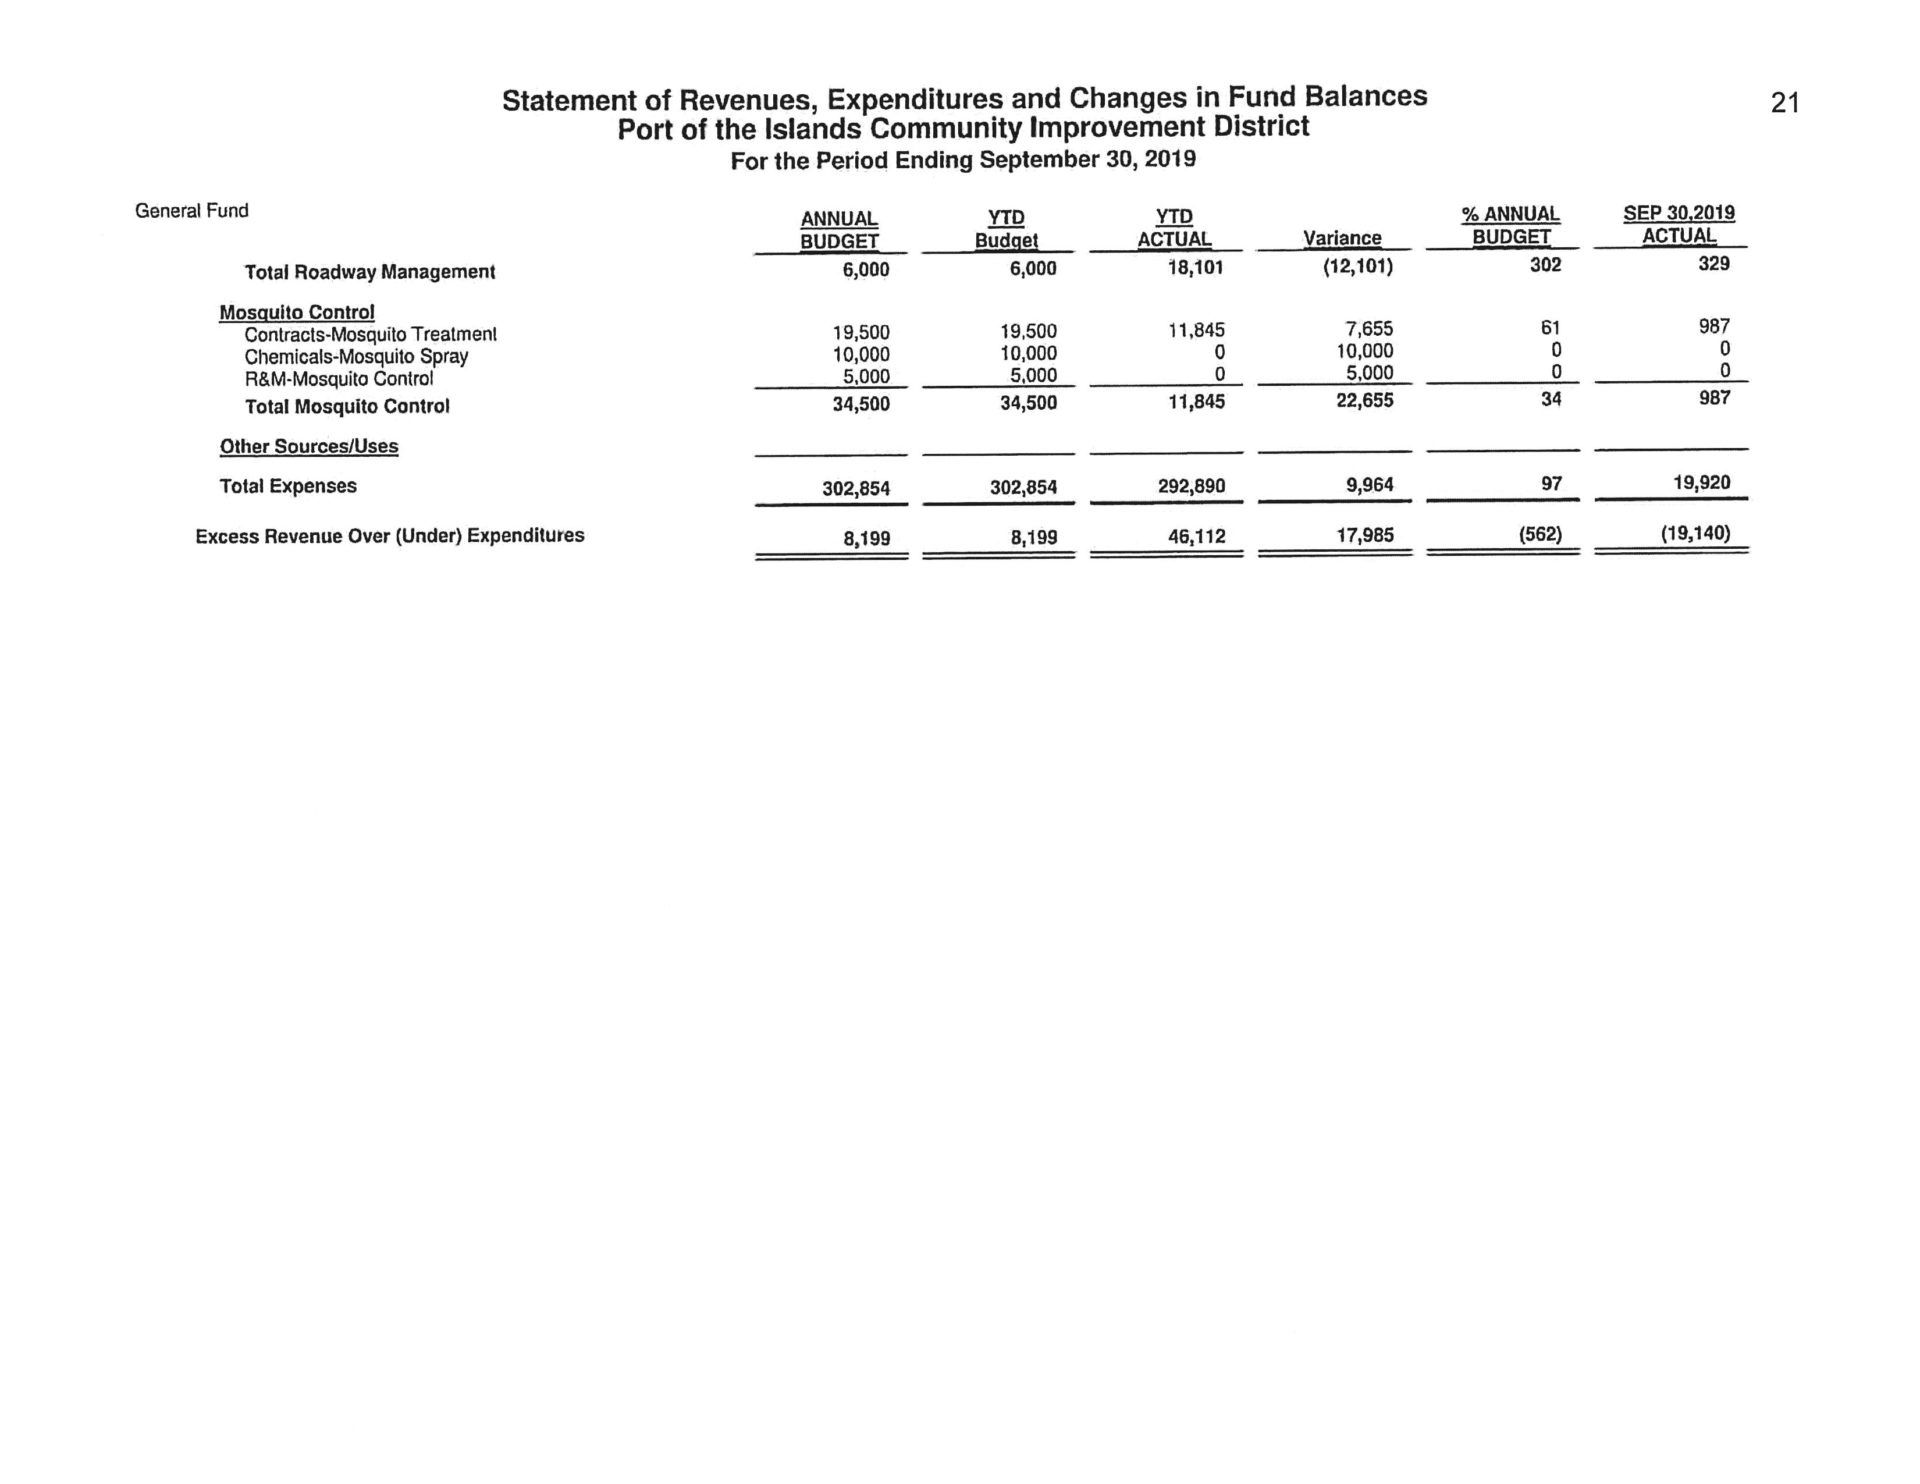 Statement of Revenues Expenditures and Changes in Fund Balance 9-2019